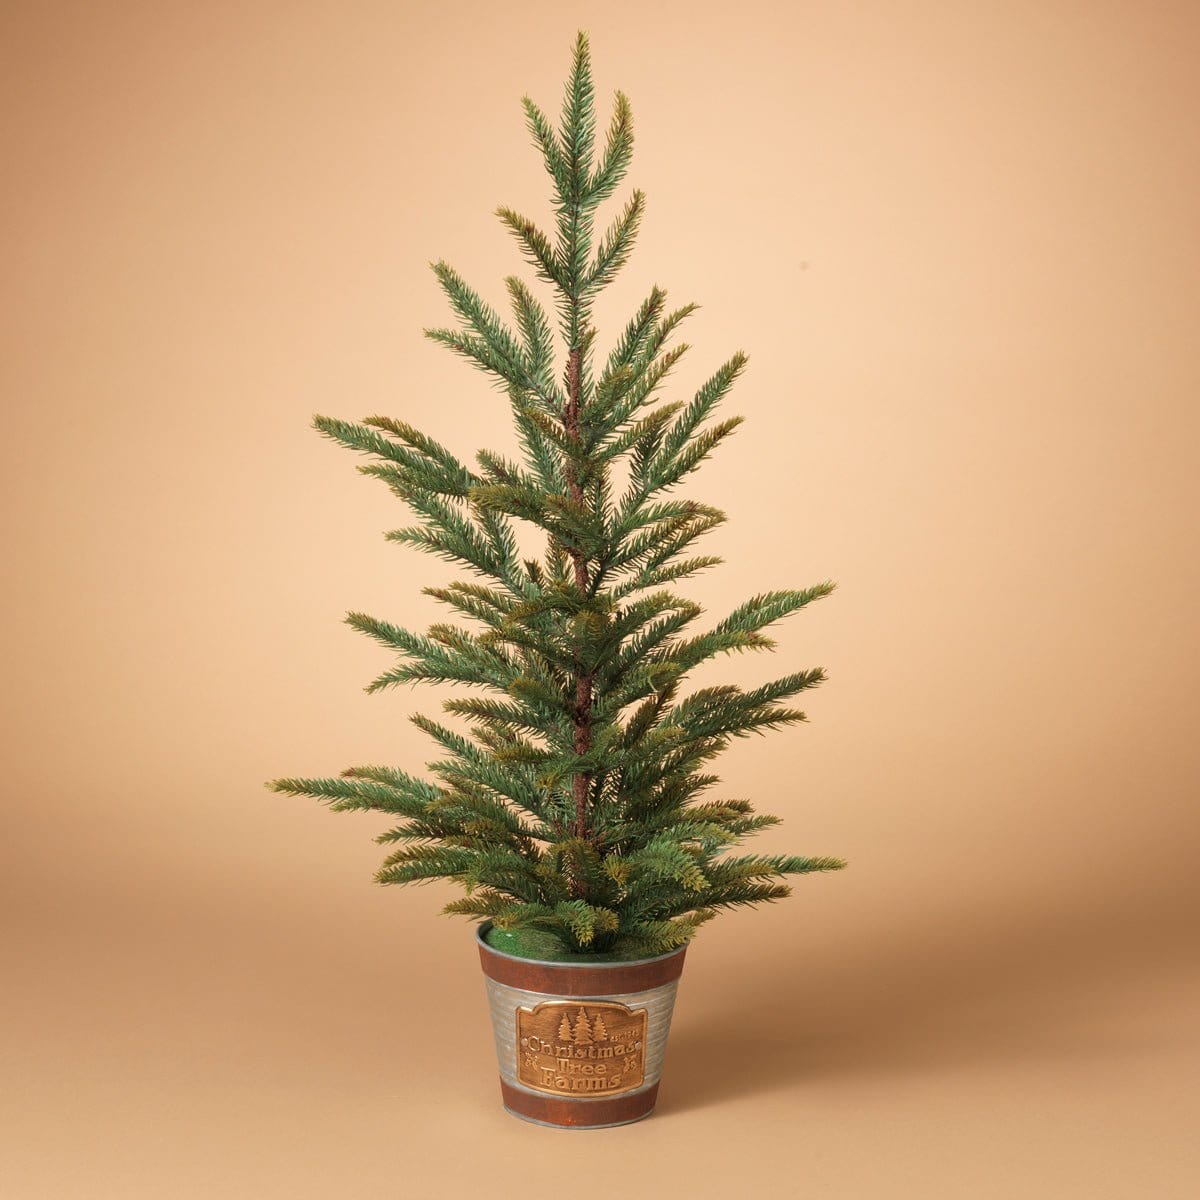 Miniature " Christmas Tree Farms" Pine Tree With Metal Container - 30" H-Gerson-The Village Merchant